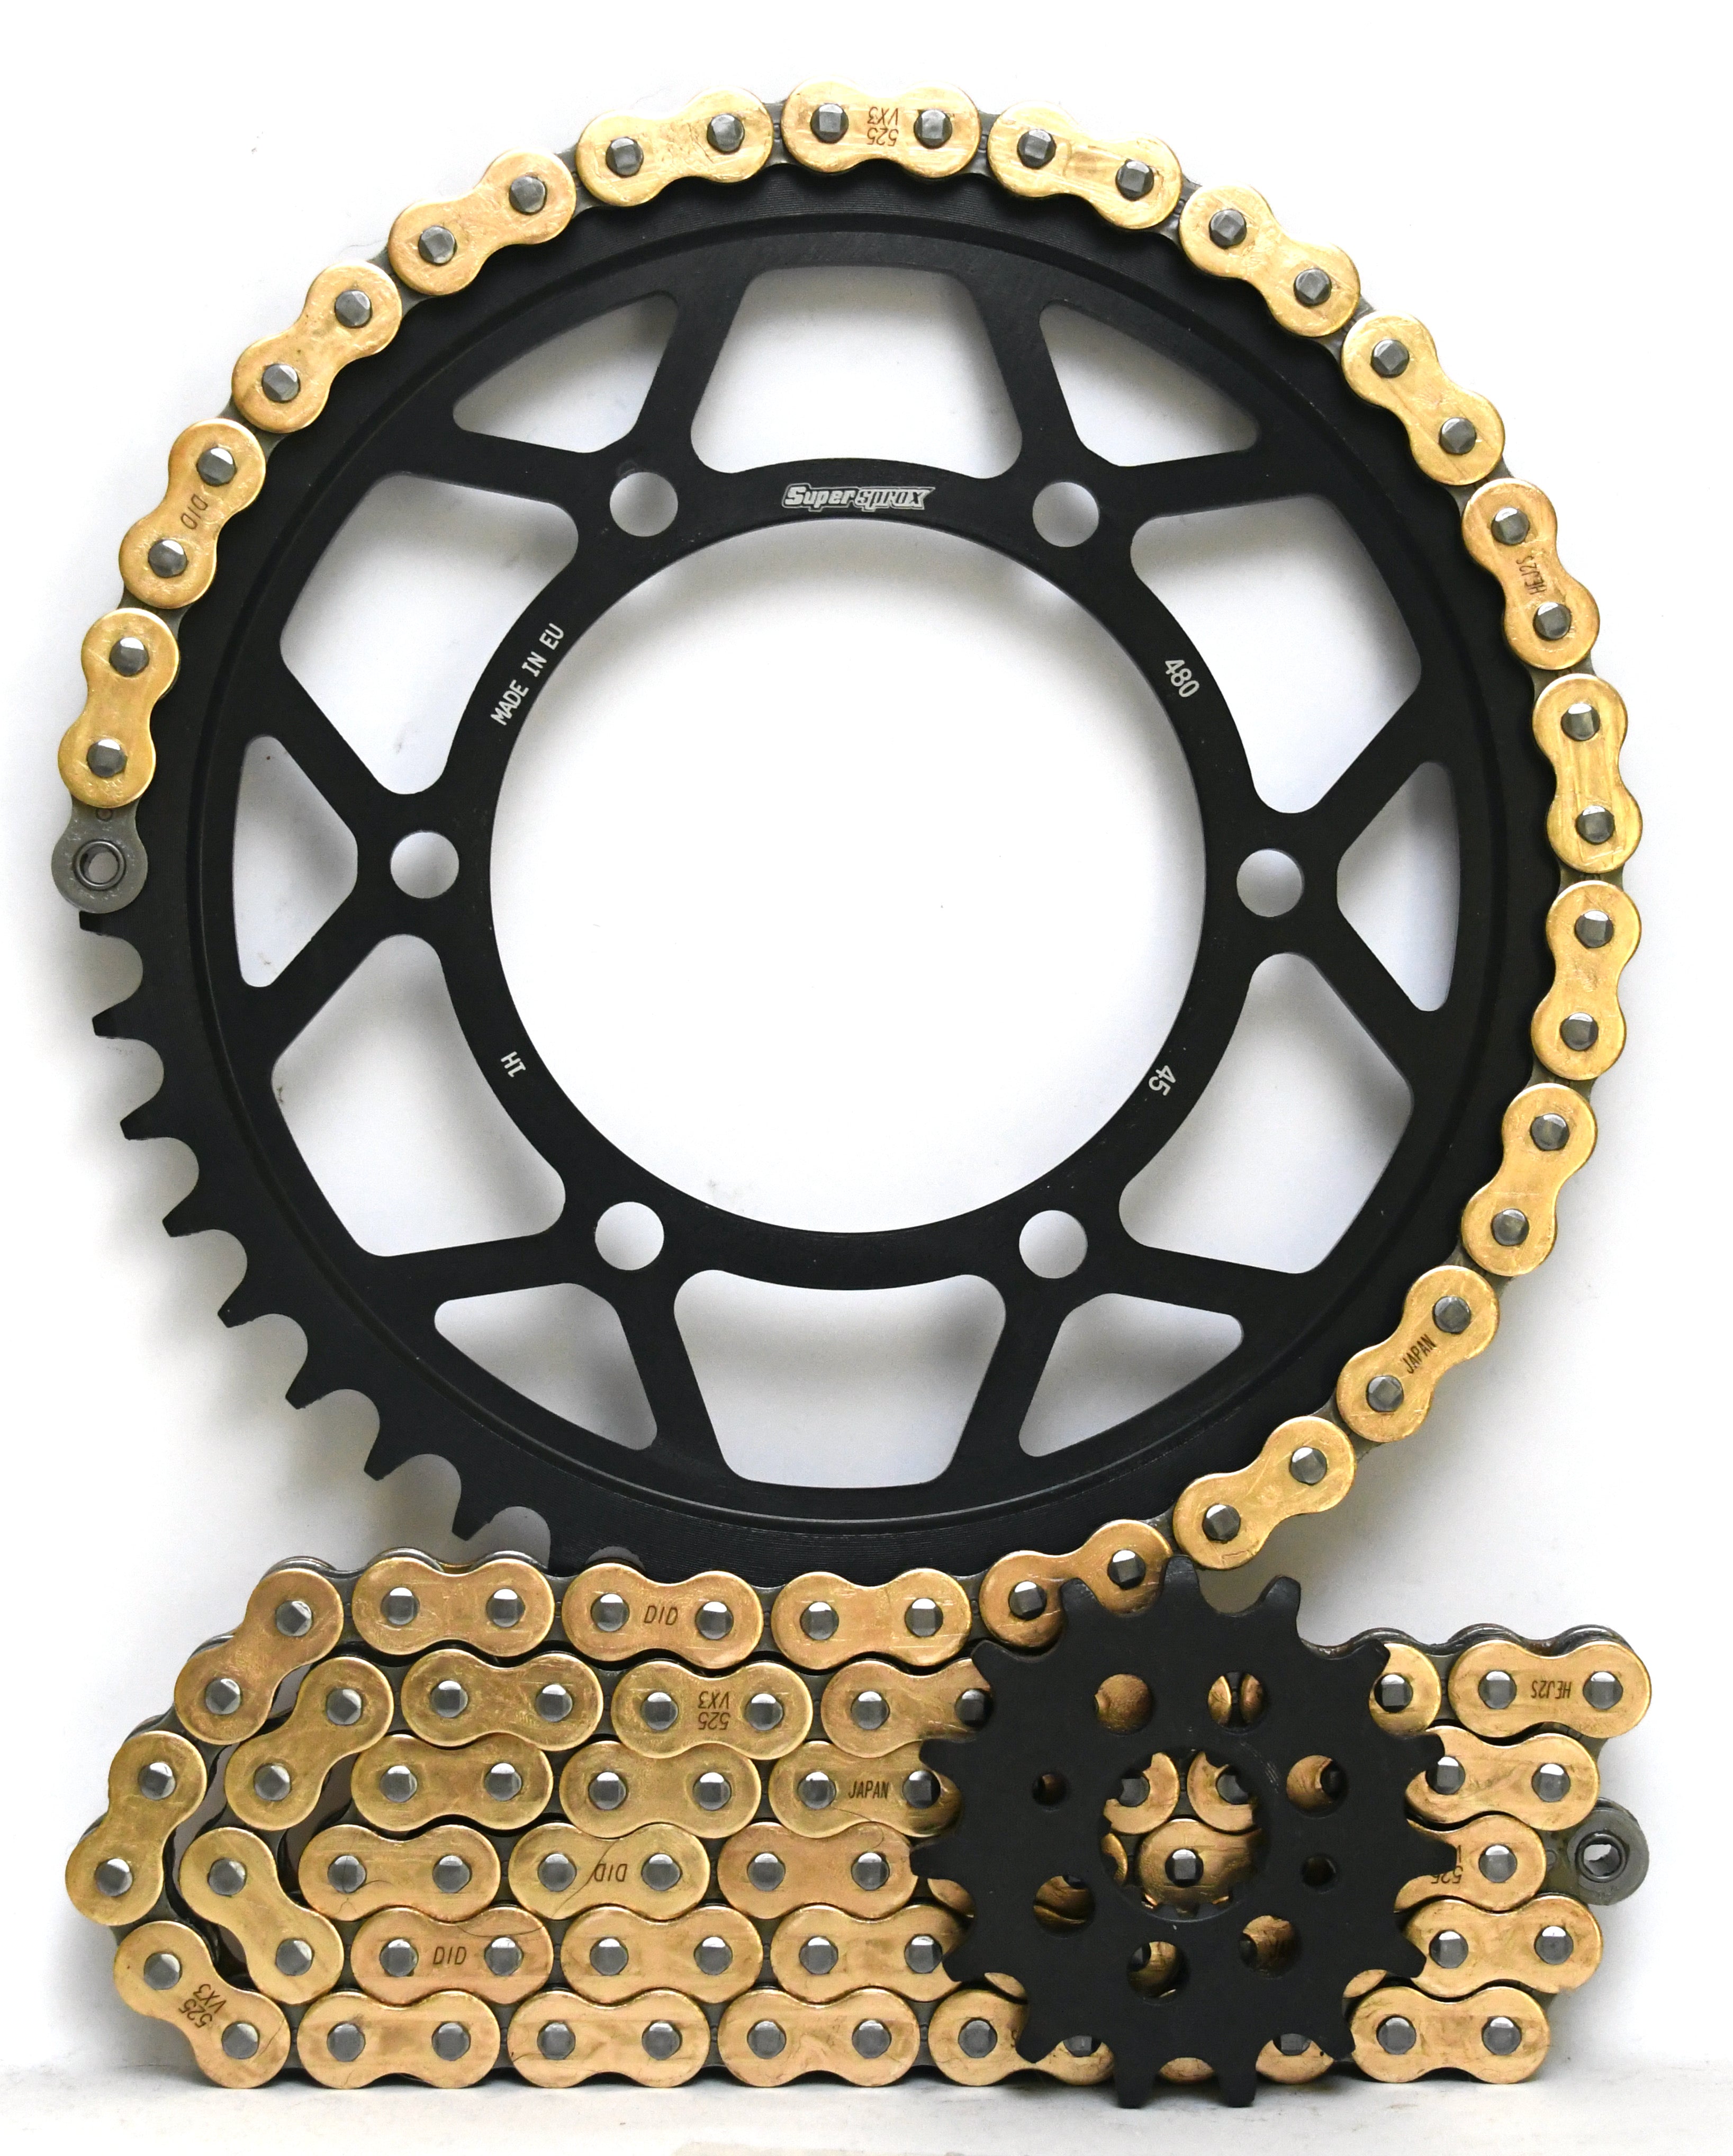 Supersprox/DID Chain and Steel Sprocket Kit - Yamaha R6 2006> Standard Gearing